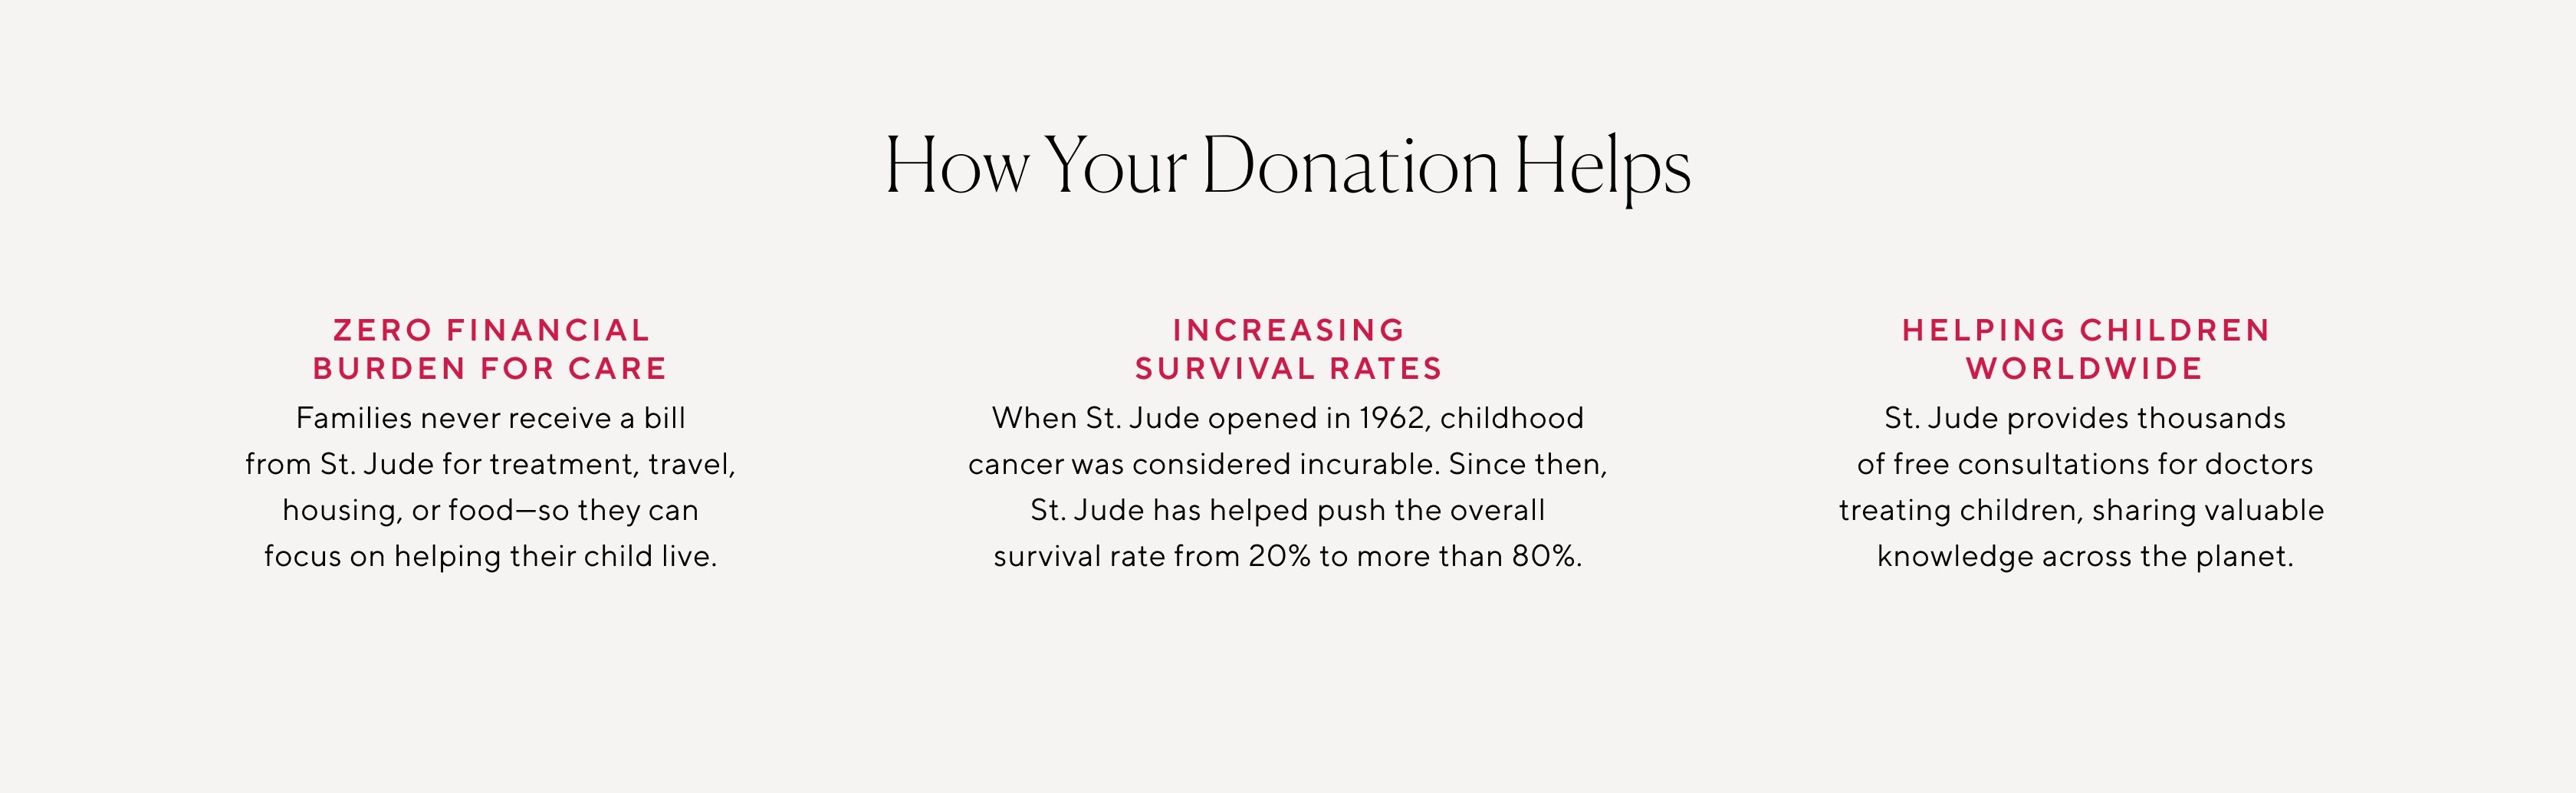 Your donation helps families with financial support, increase survival rate, and help childent across the planet.